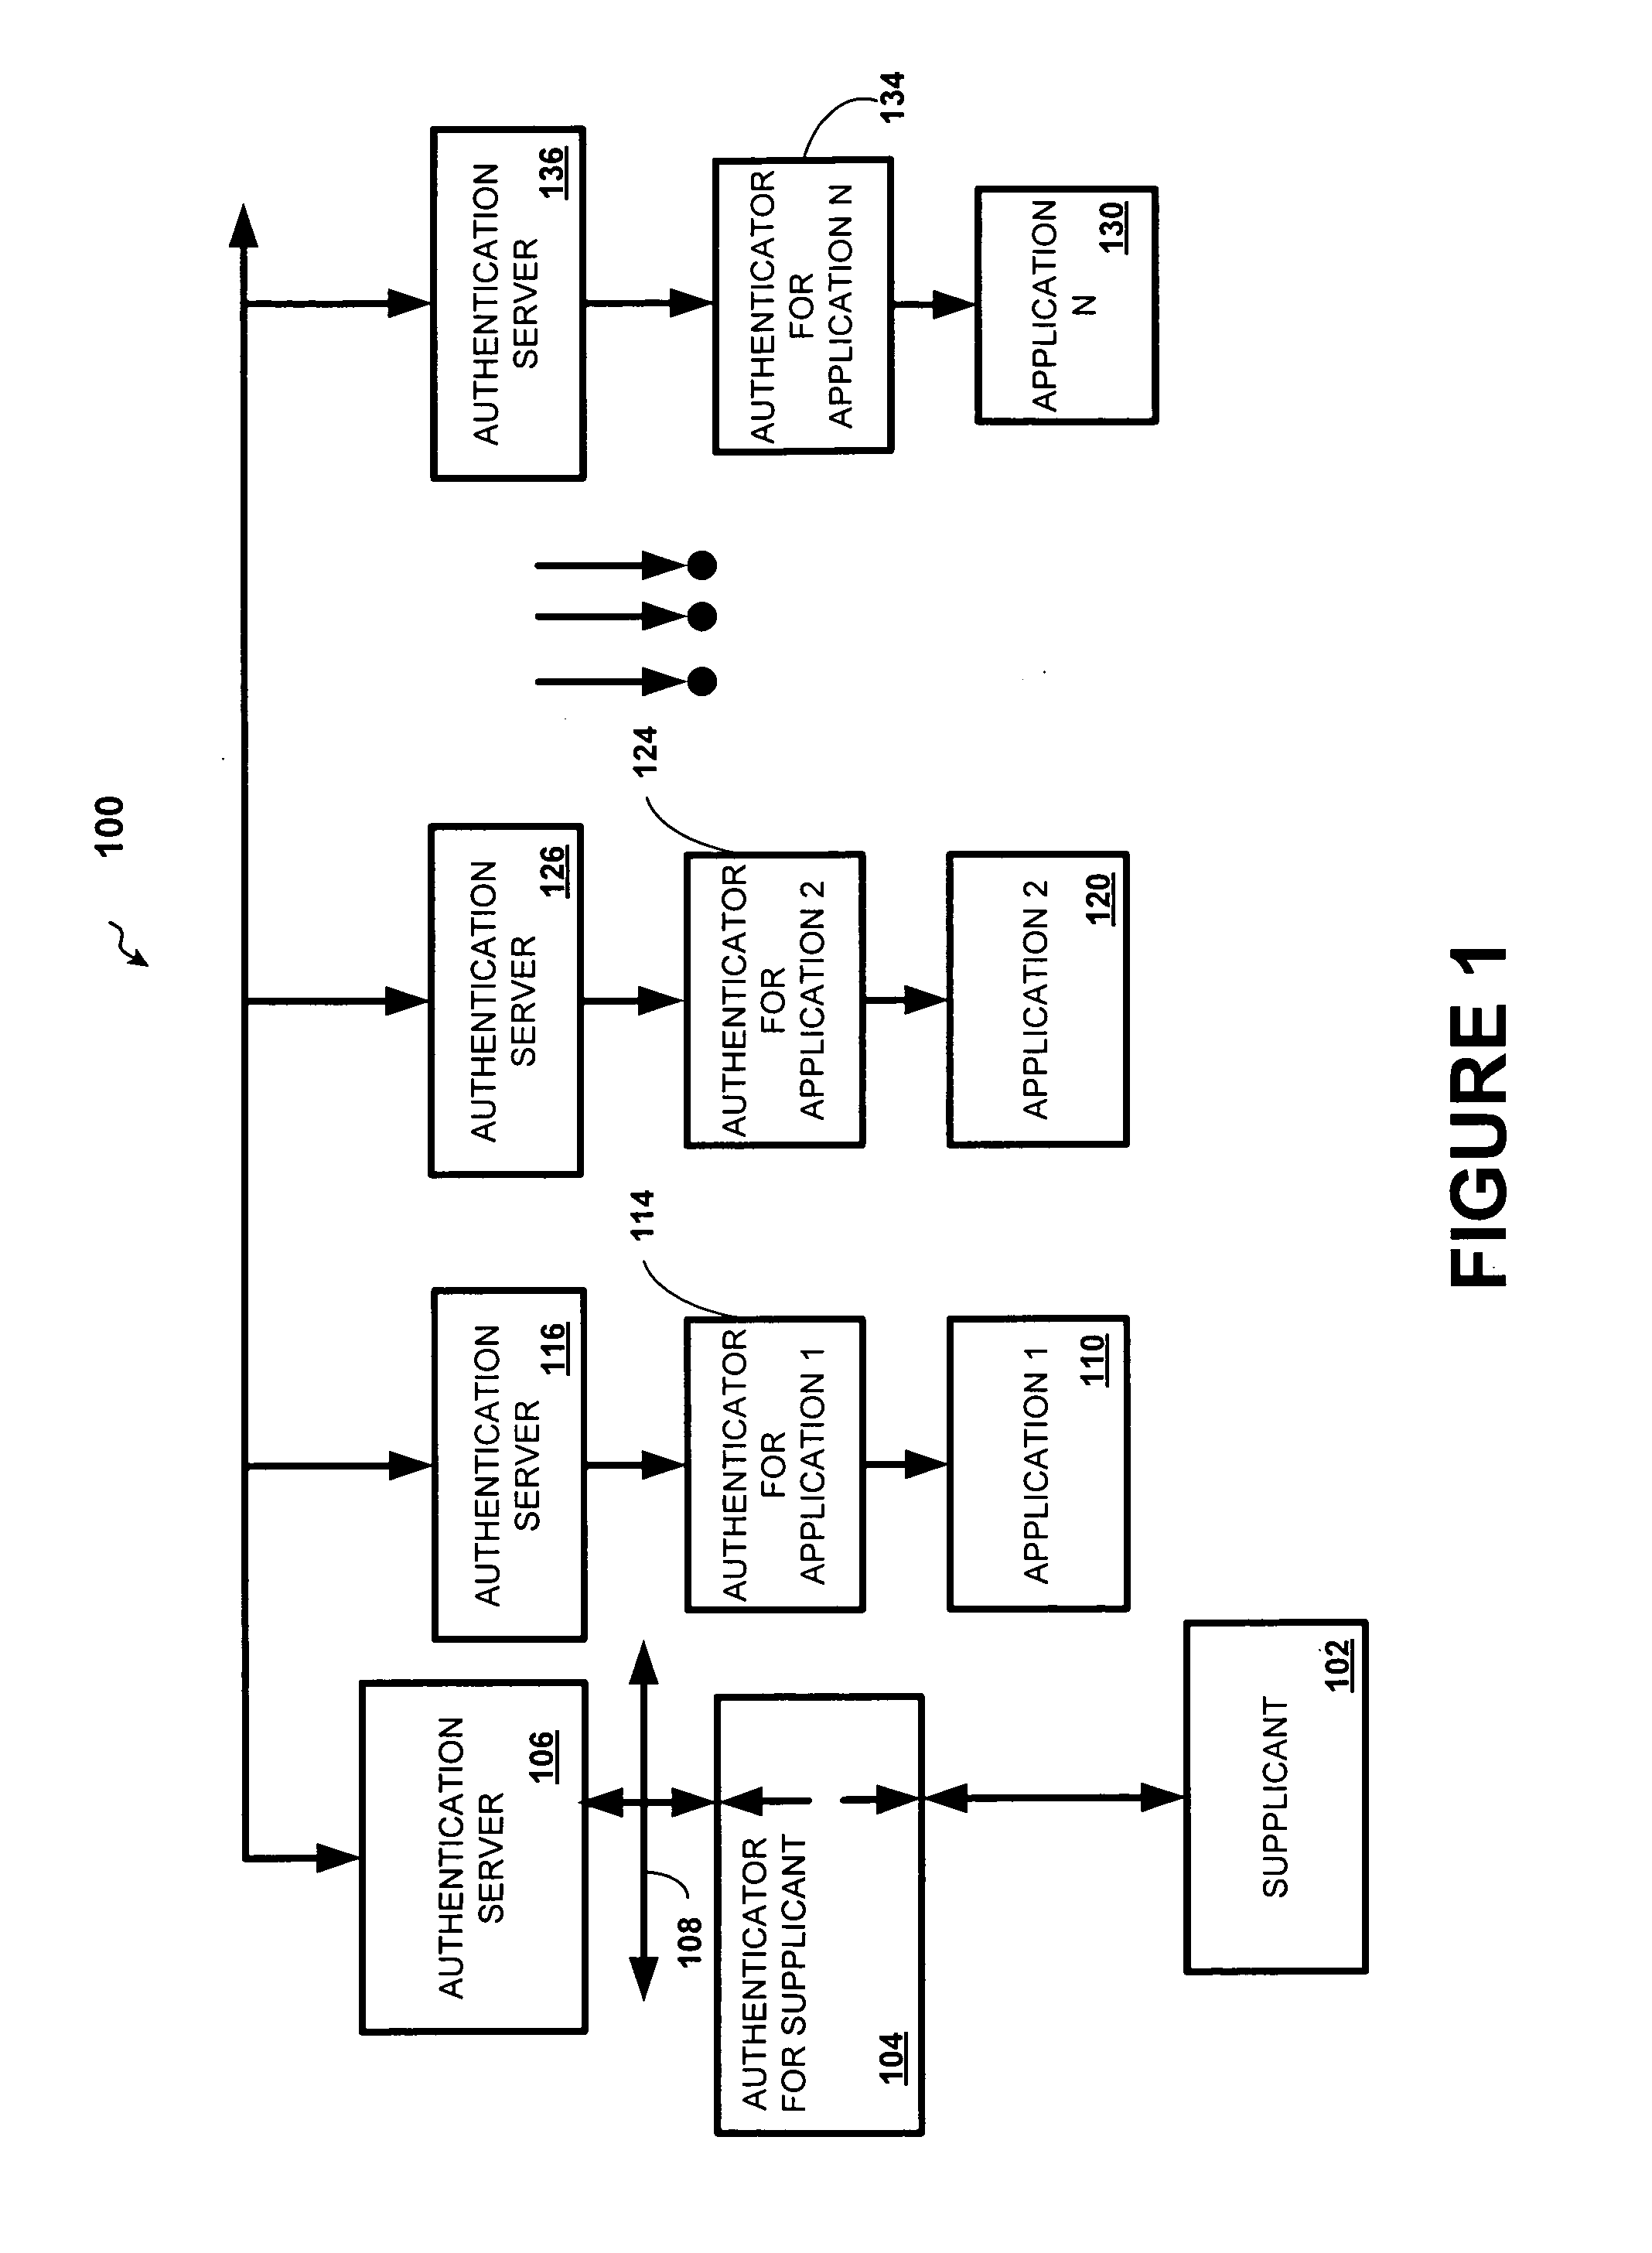 System and method for multi-session establishment involving disjoint authentication and authorization servers